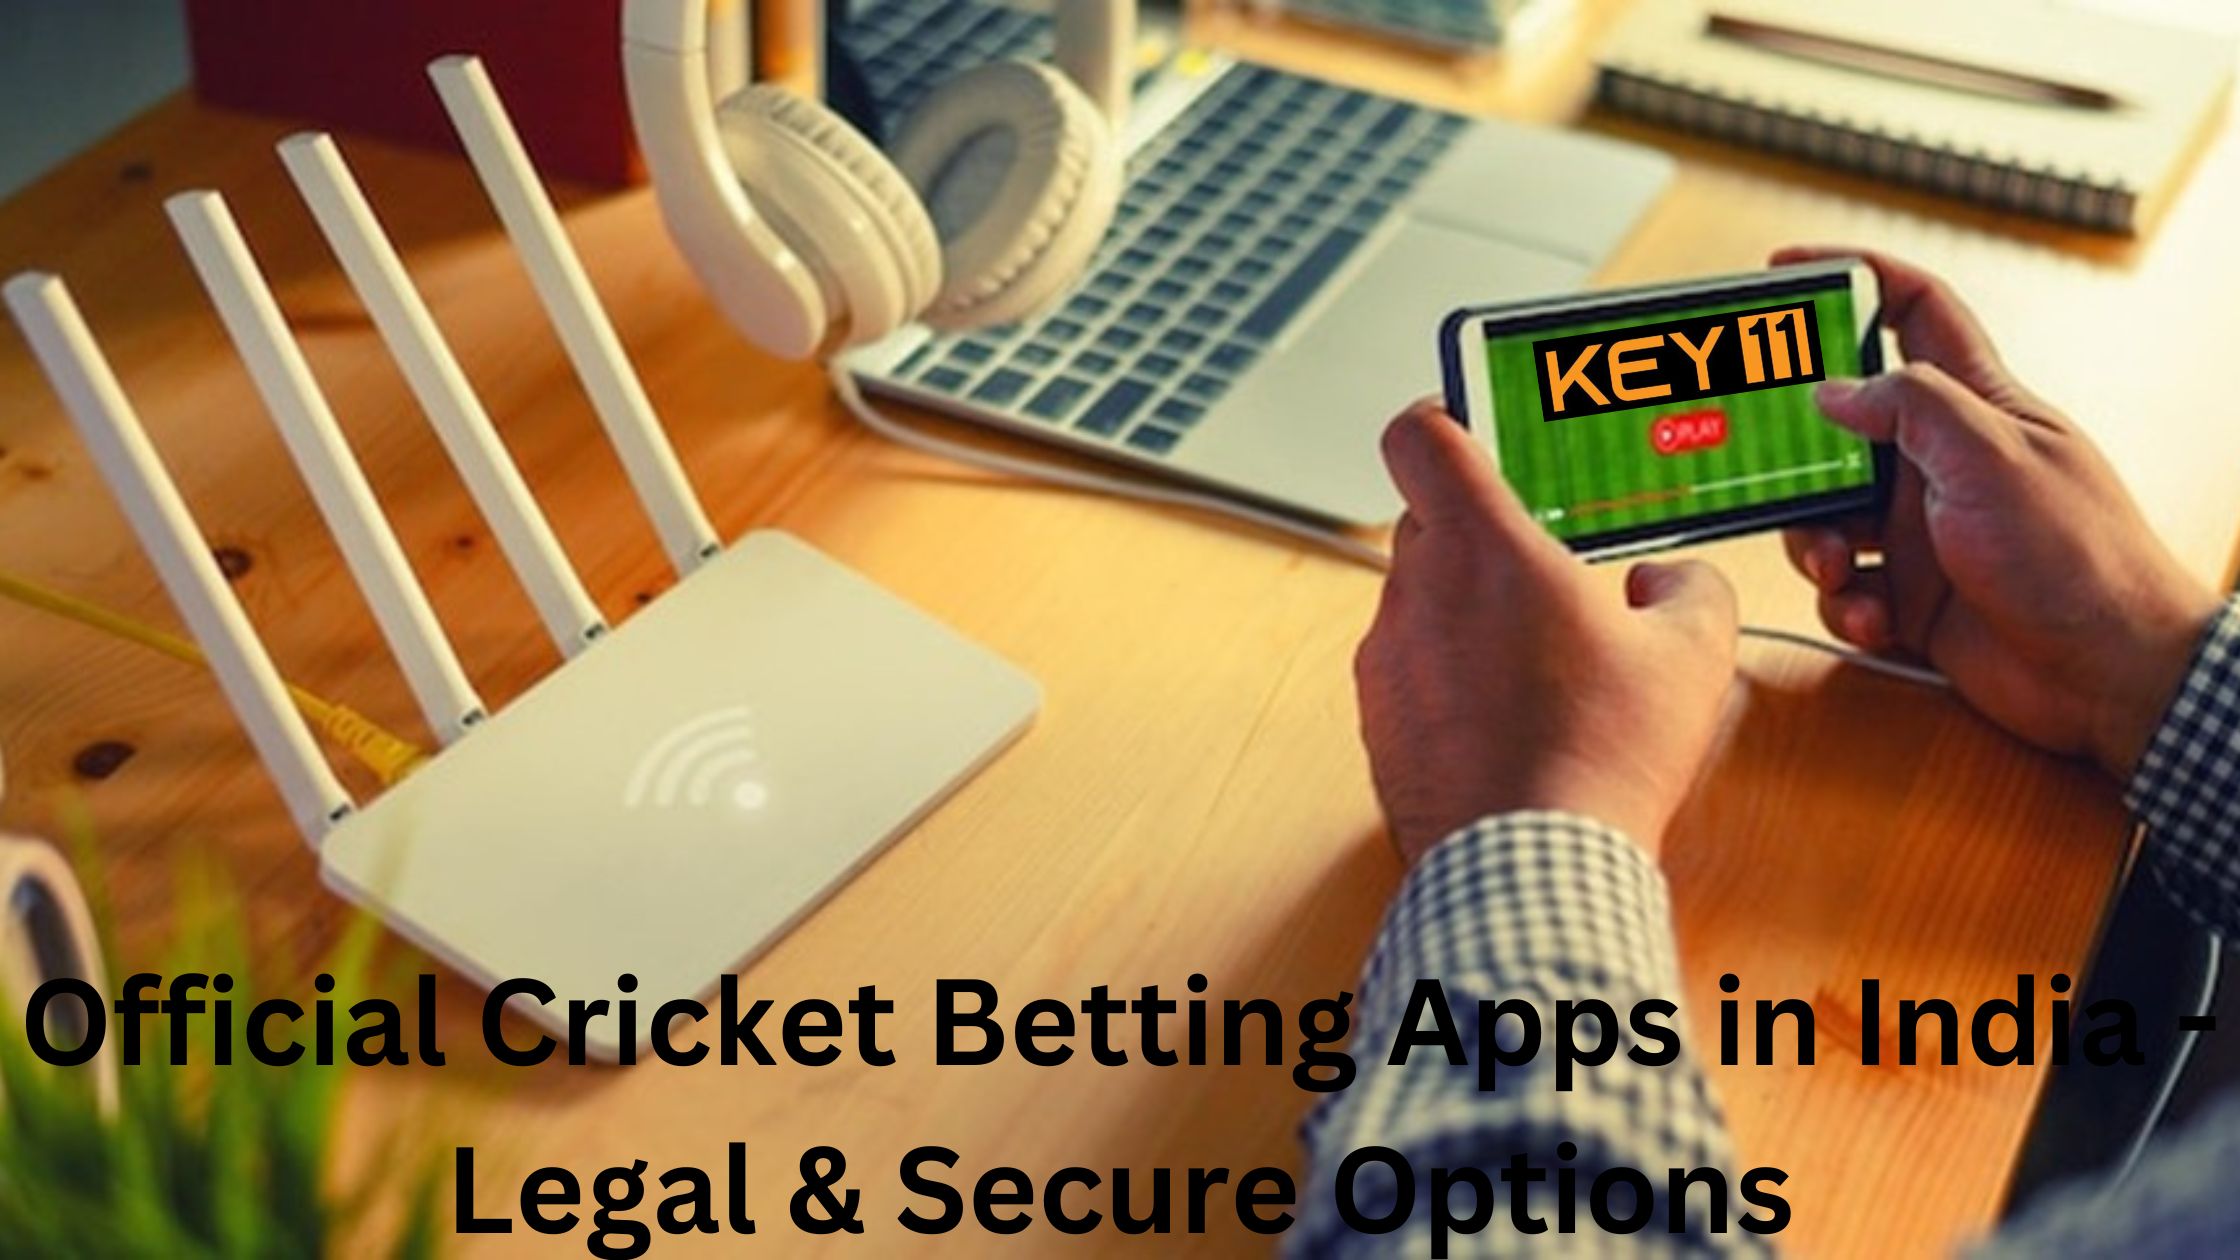 Official Cricket Betting Apps in India - Legal & Secure Options